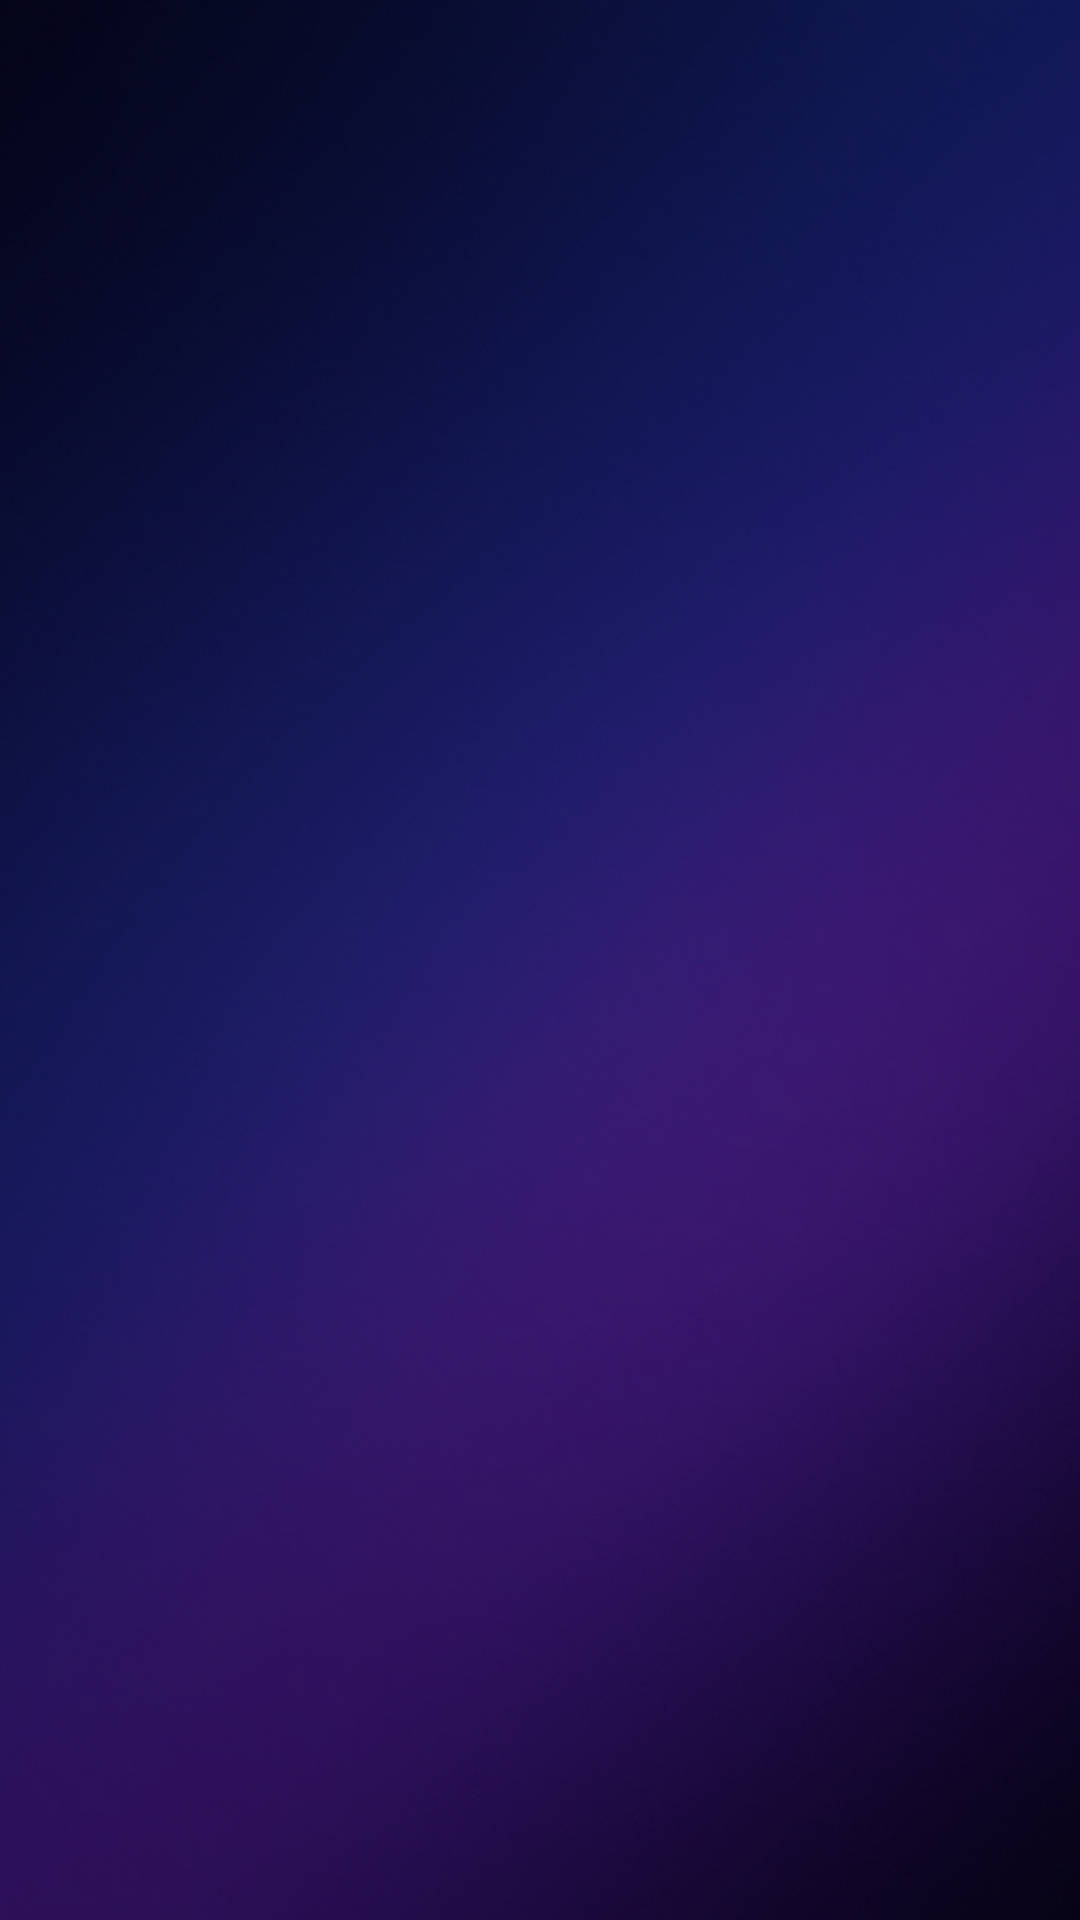 Blue And Violet Galaxy S10 Background